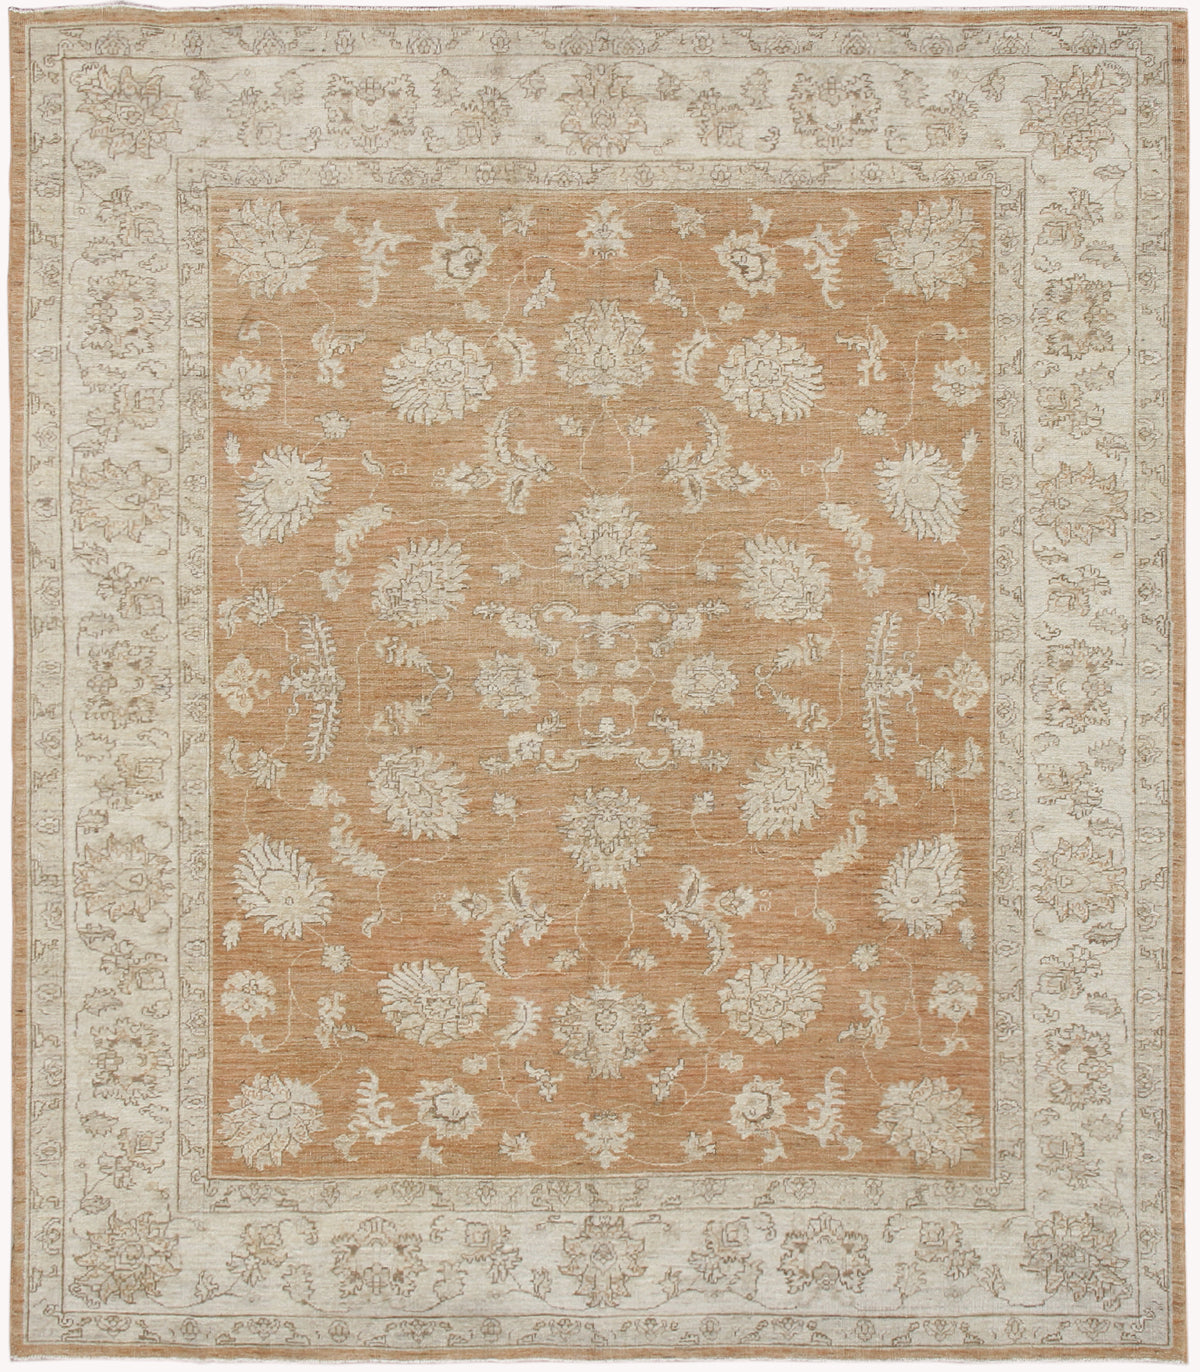 7'x8 'Ariana Traditional Agra Design Taupe Ivory Brown Rug